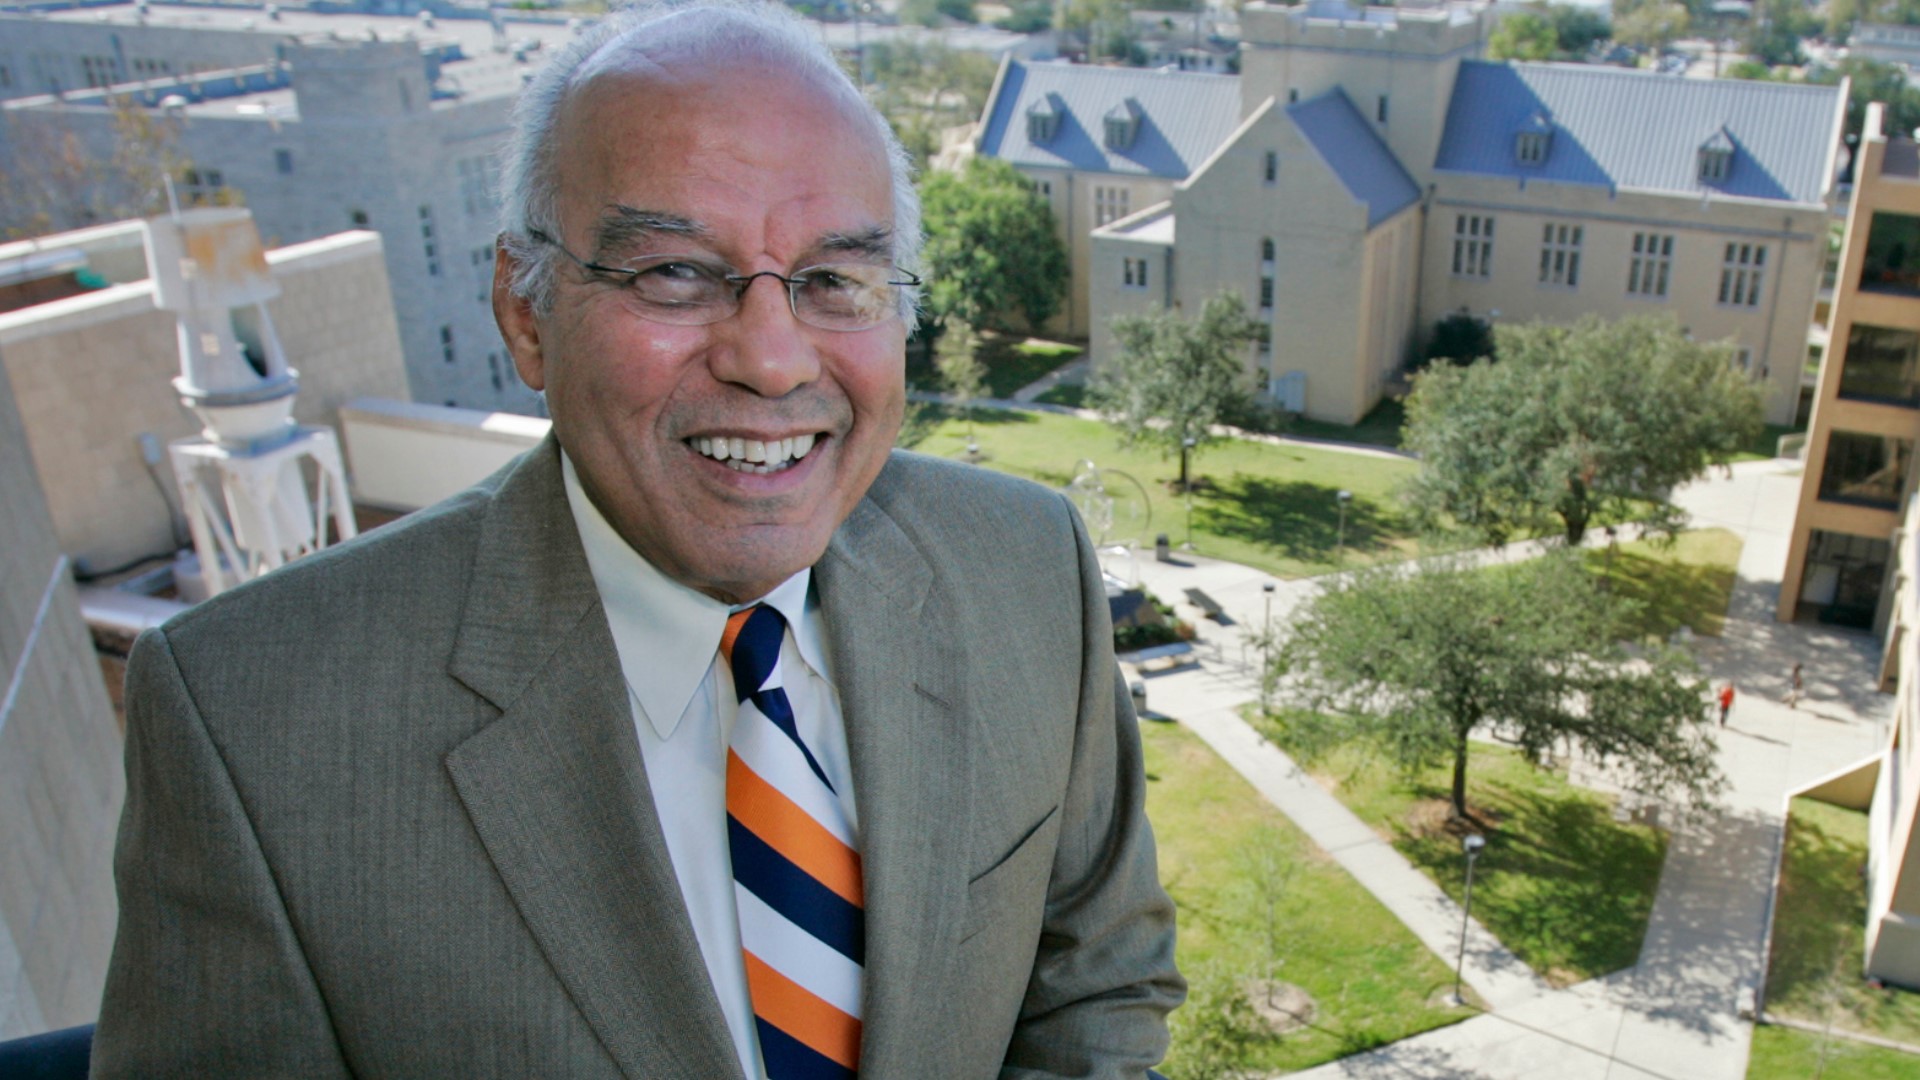 The street will be renamed after Dr. Norman C. Francis, but not until after the 2020 election.